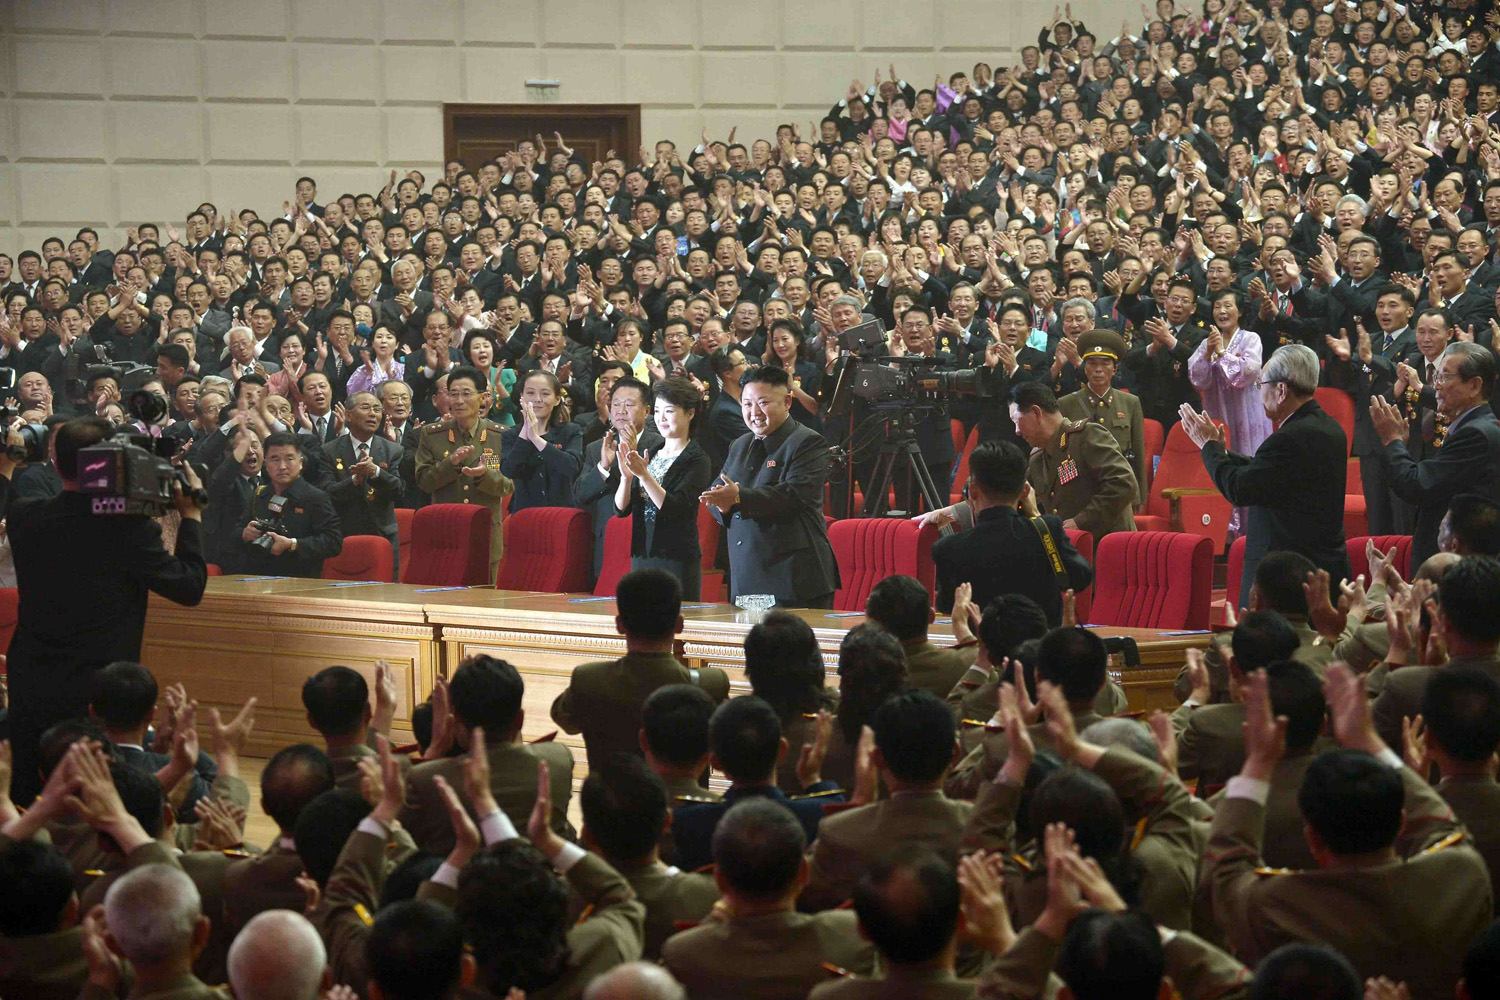 North Korean leader Kim Jong Un accompanied by wife Ri Sol Ju applaud as they enjoy art performance by Moranbong Band at April 25 House of Culture in Pyongyang